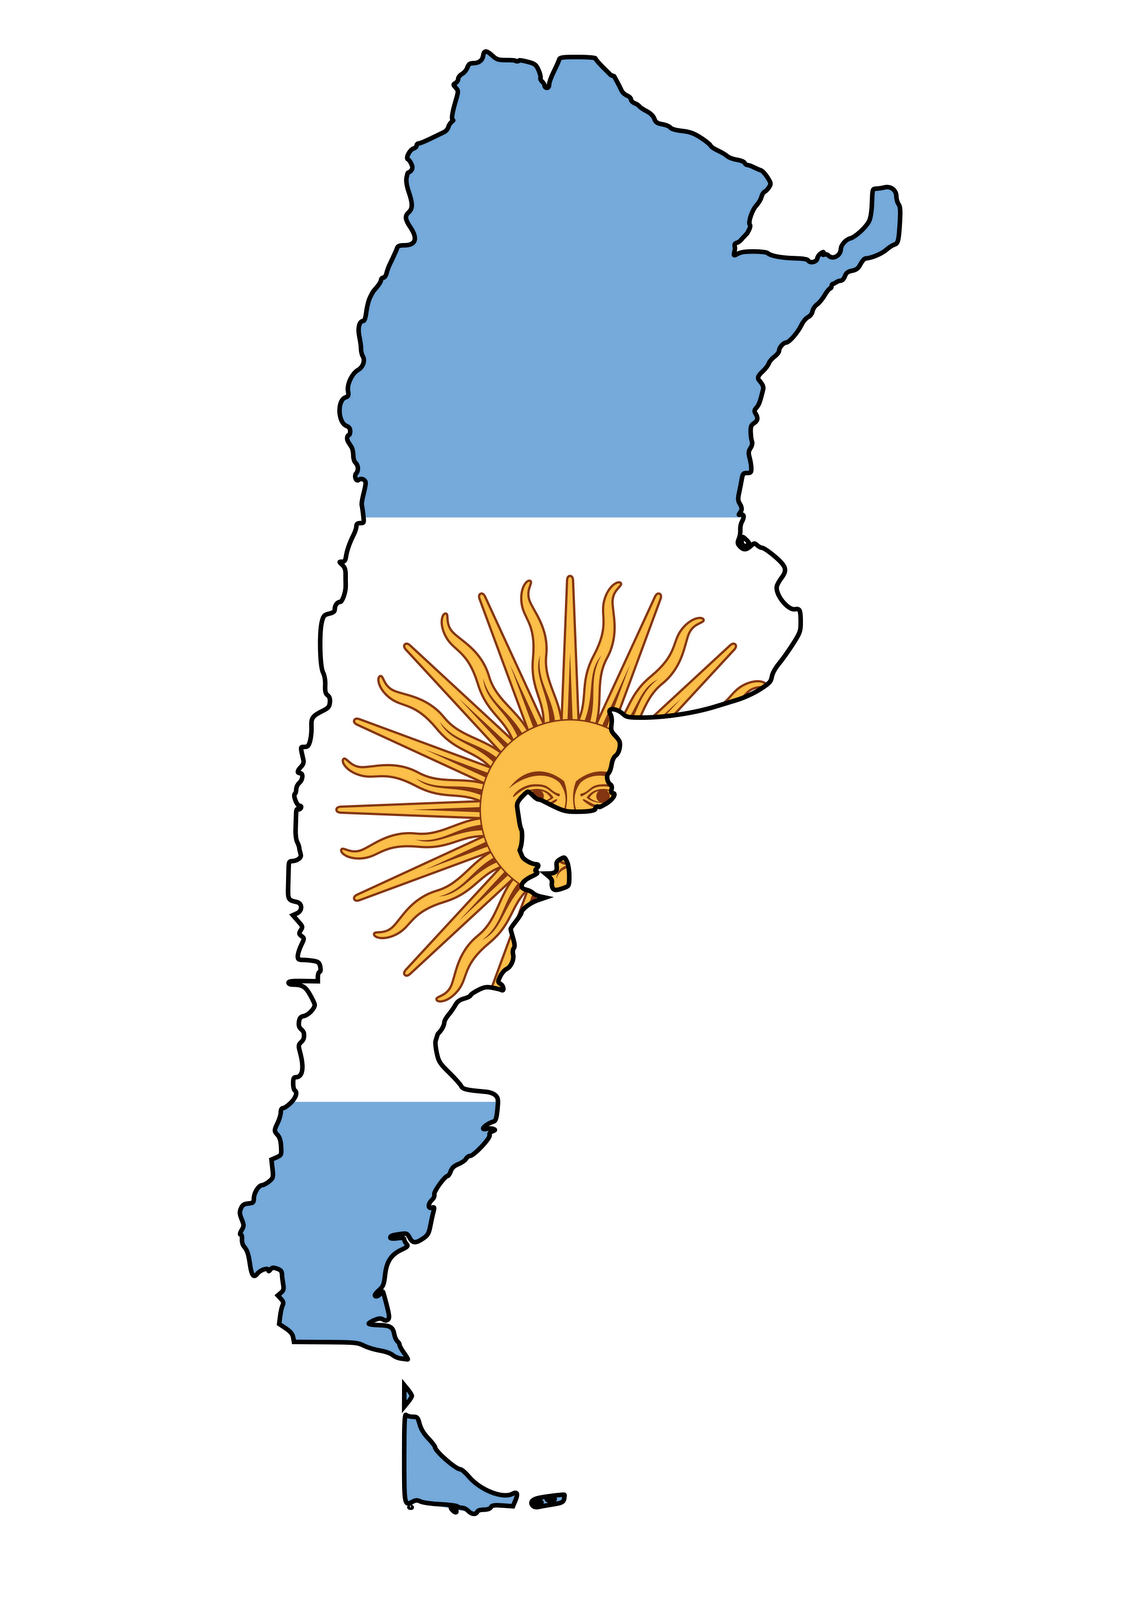 What does the flag of Argentina mean?